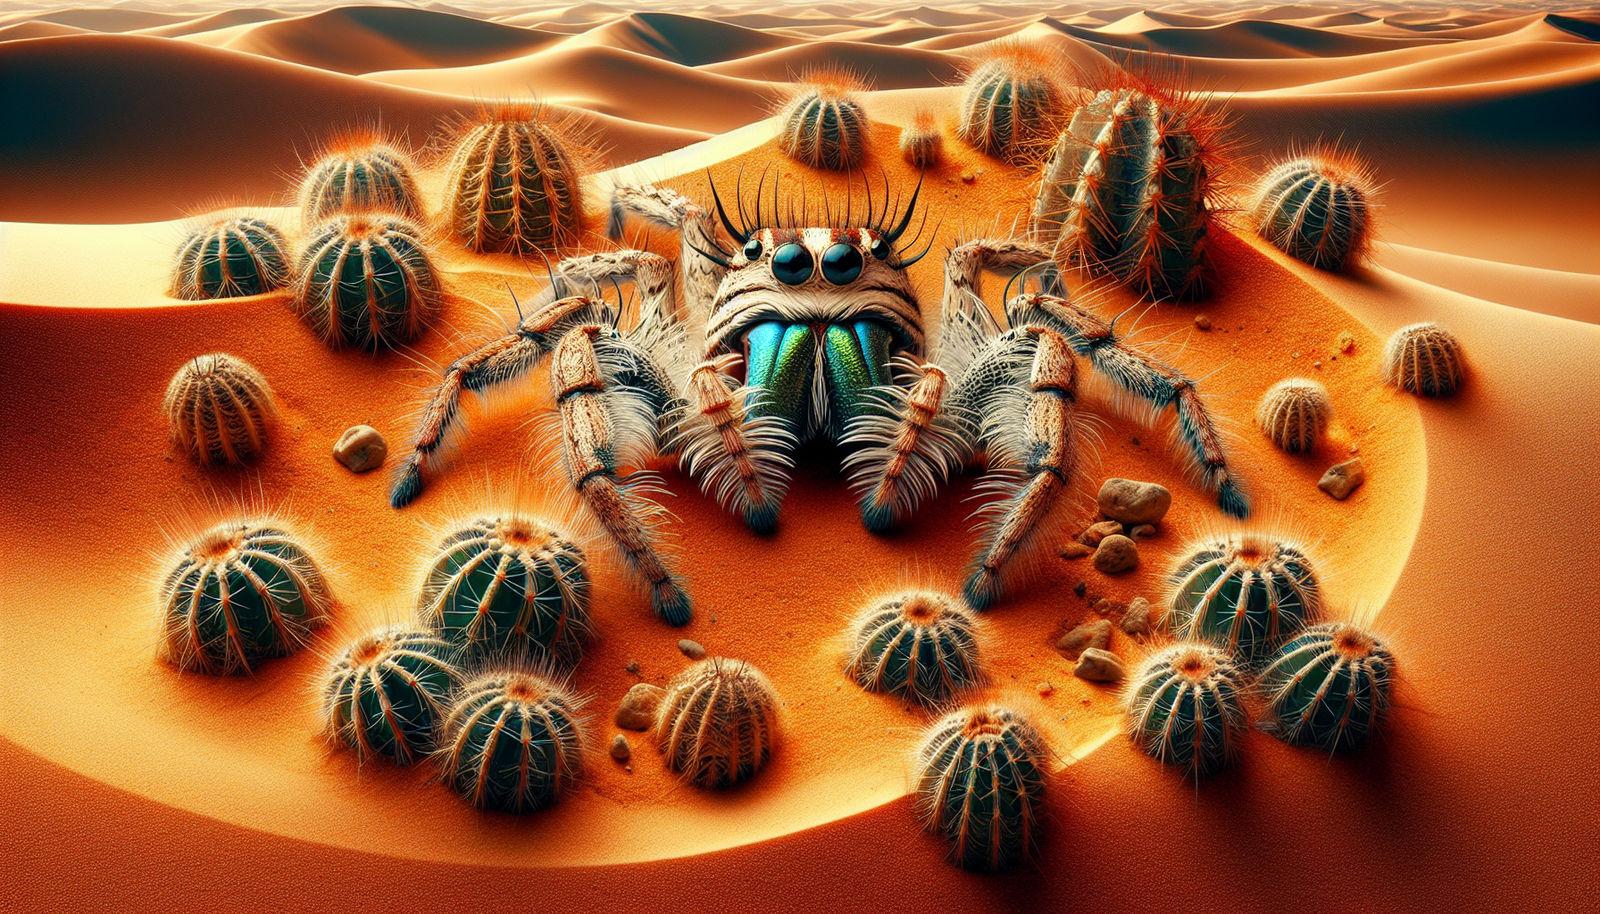 Can You Recommend Some Desert-dwelling Jumping Spider Species That Are Suitable For Captivity?